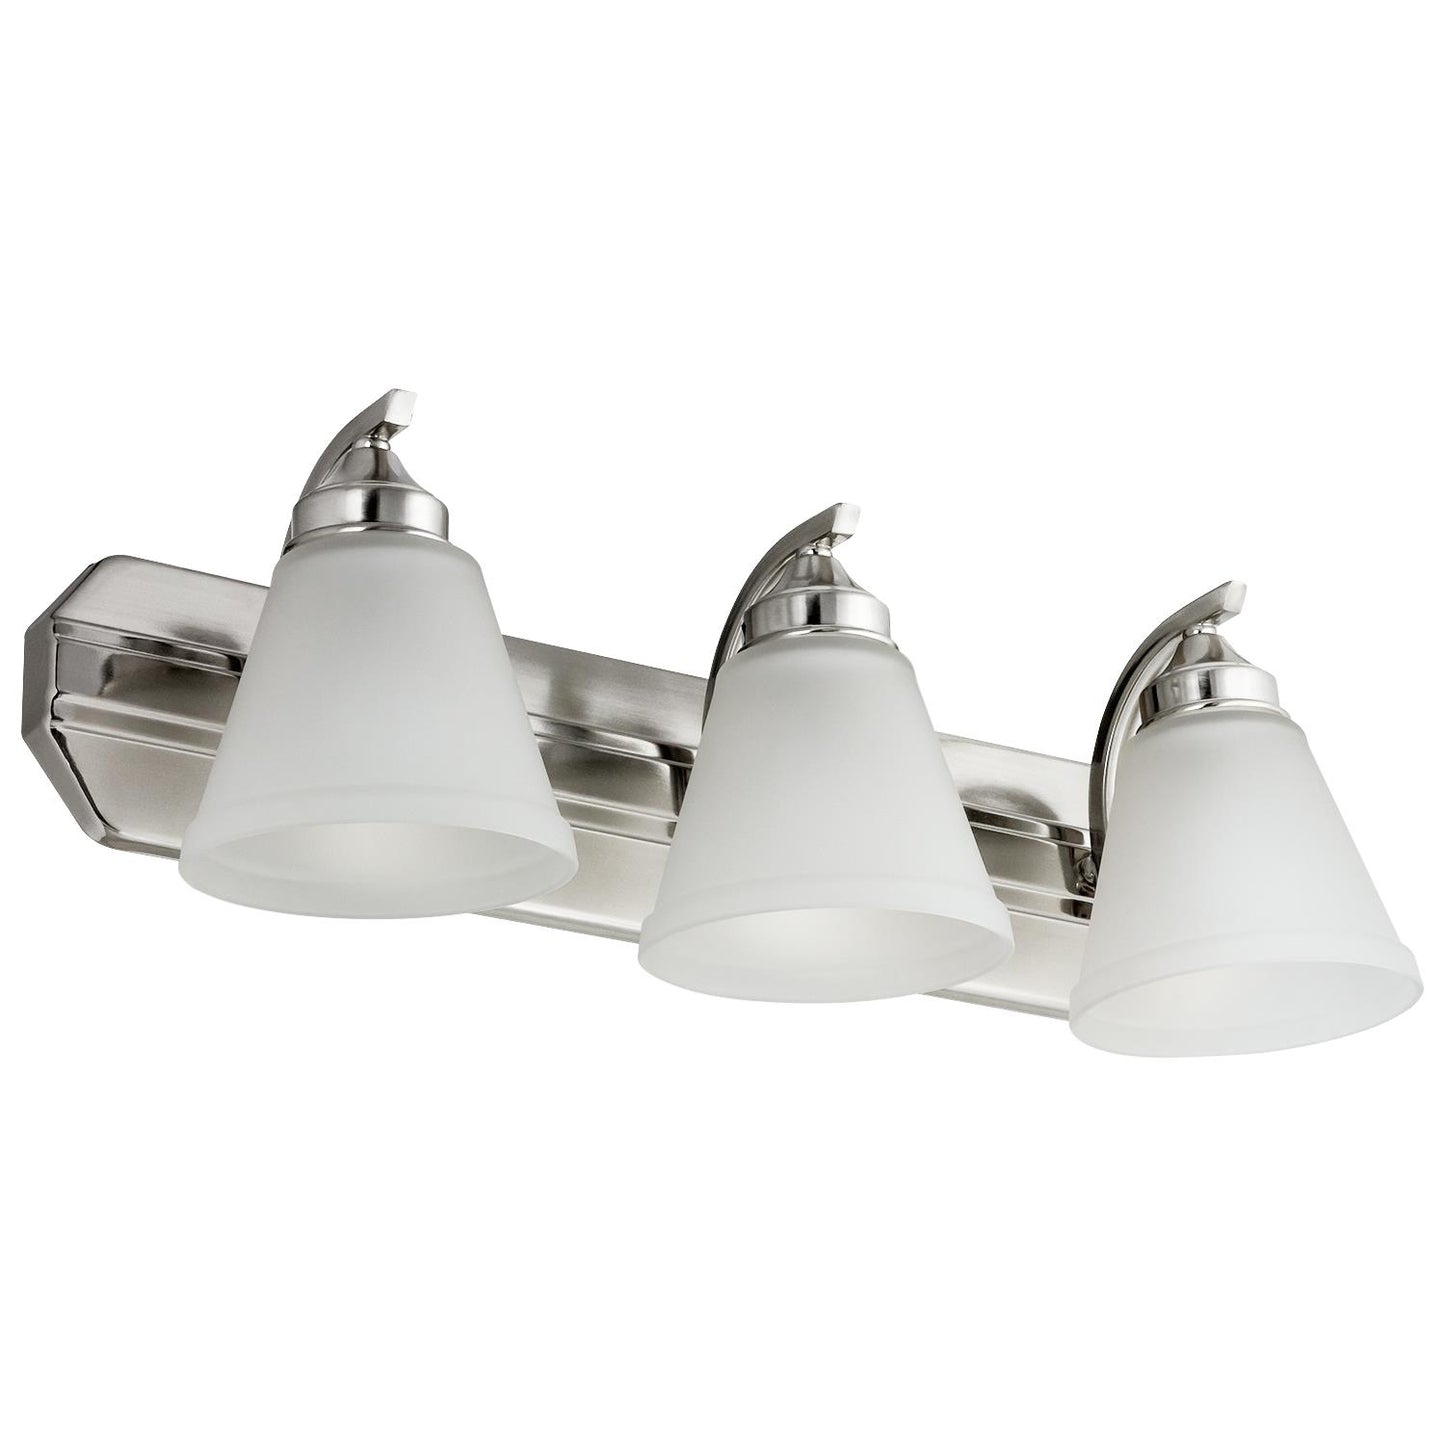 Sunlite 45057-SU Vanity Fixture Three Light 24 Inch, Bell Shaped Frosted Glass, Brushed Nickel Finish